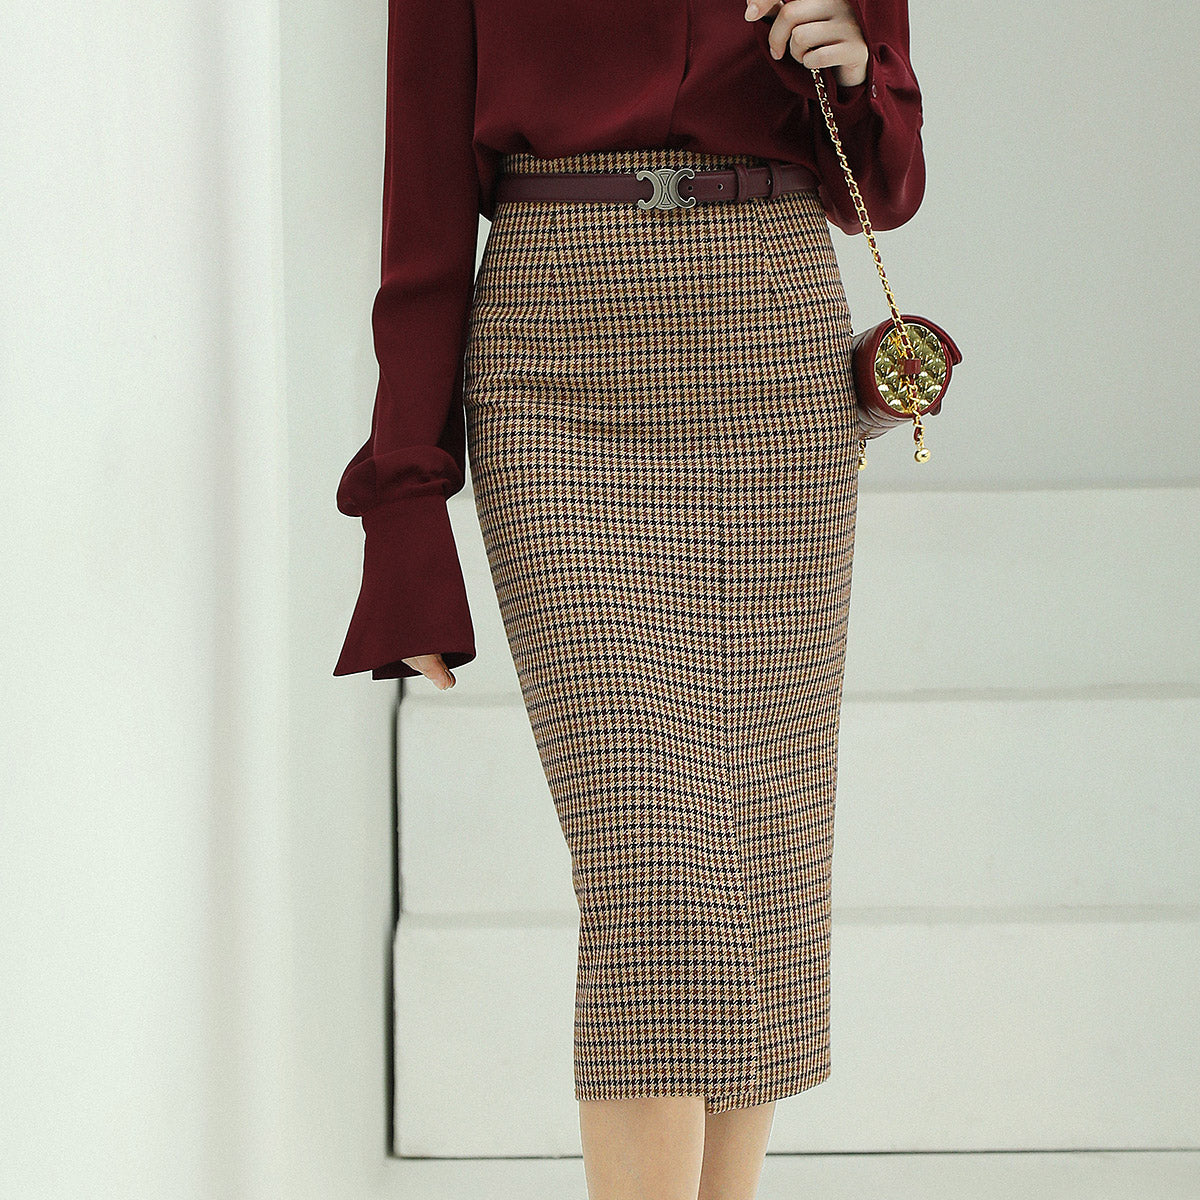 houndstooth-brown-checkered-wool-skirt_all_check_1.jpg